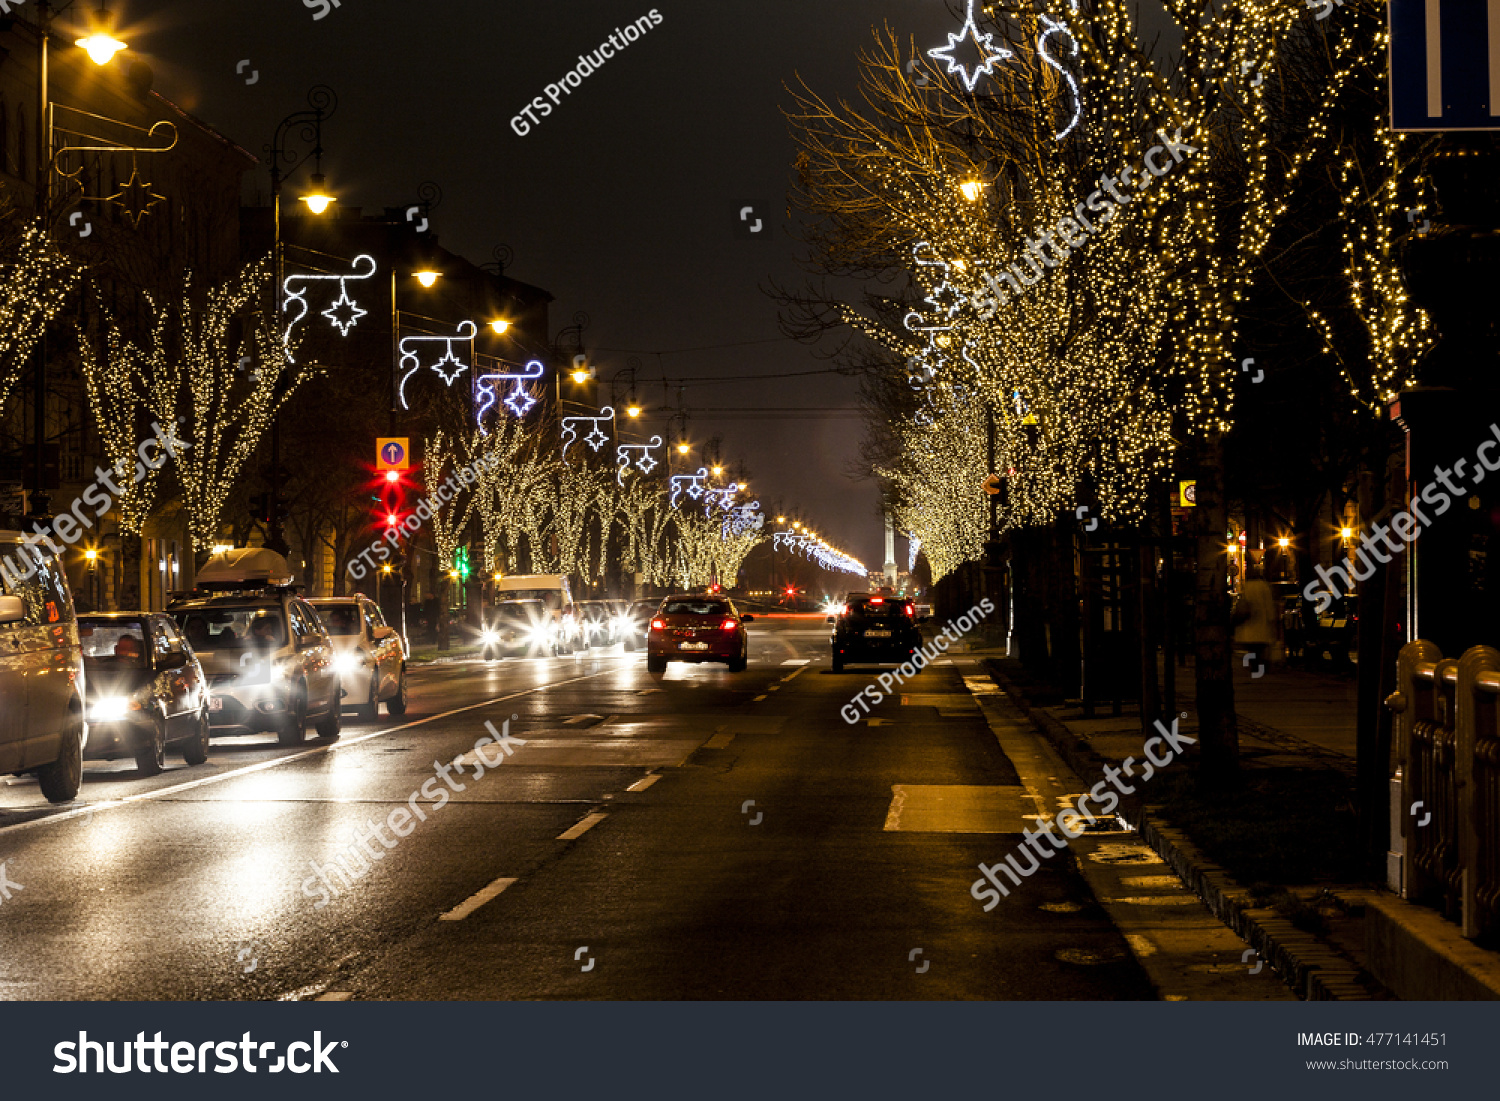 BUDAPEST, HUNGARY - DEC 19 2015: Tourists enjoy the Christmas spirit and the light show in down town Budapest. This traditional Christmas fair attracts over million visitors each year. #477141451